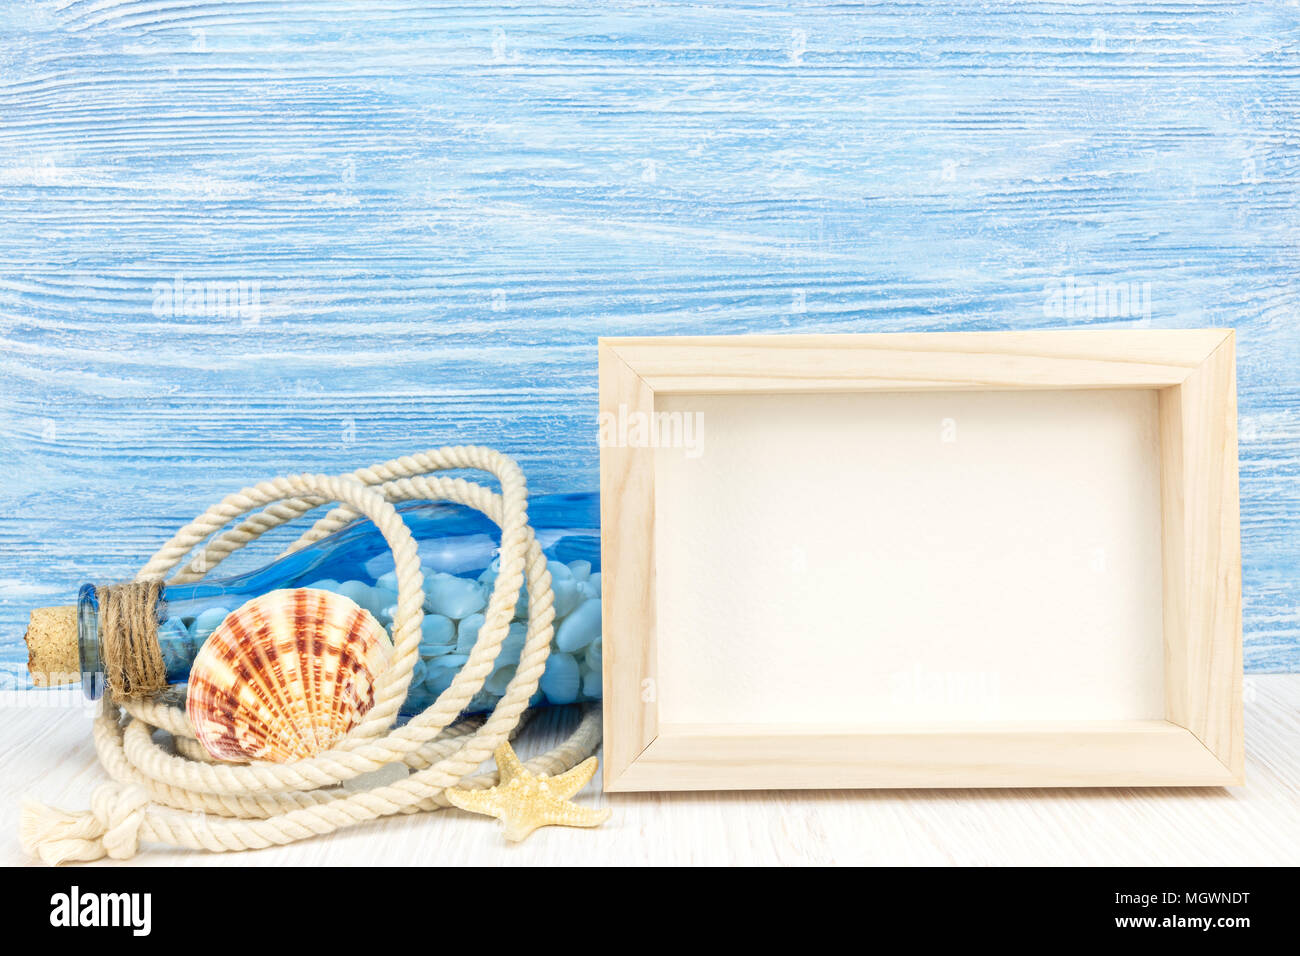 empty photo frame, bottle with seashells, marine knot, rope and starfish on blue wooden boards background  Stock Photo